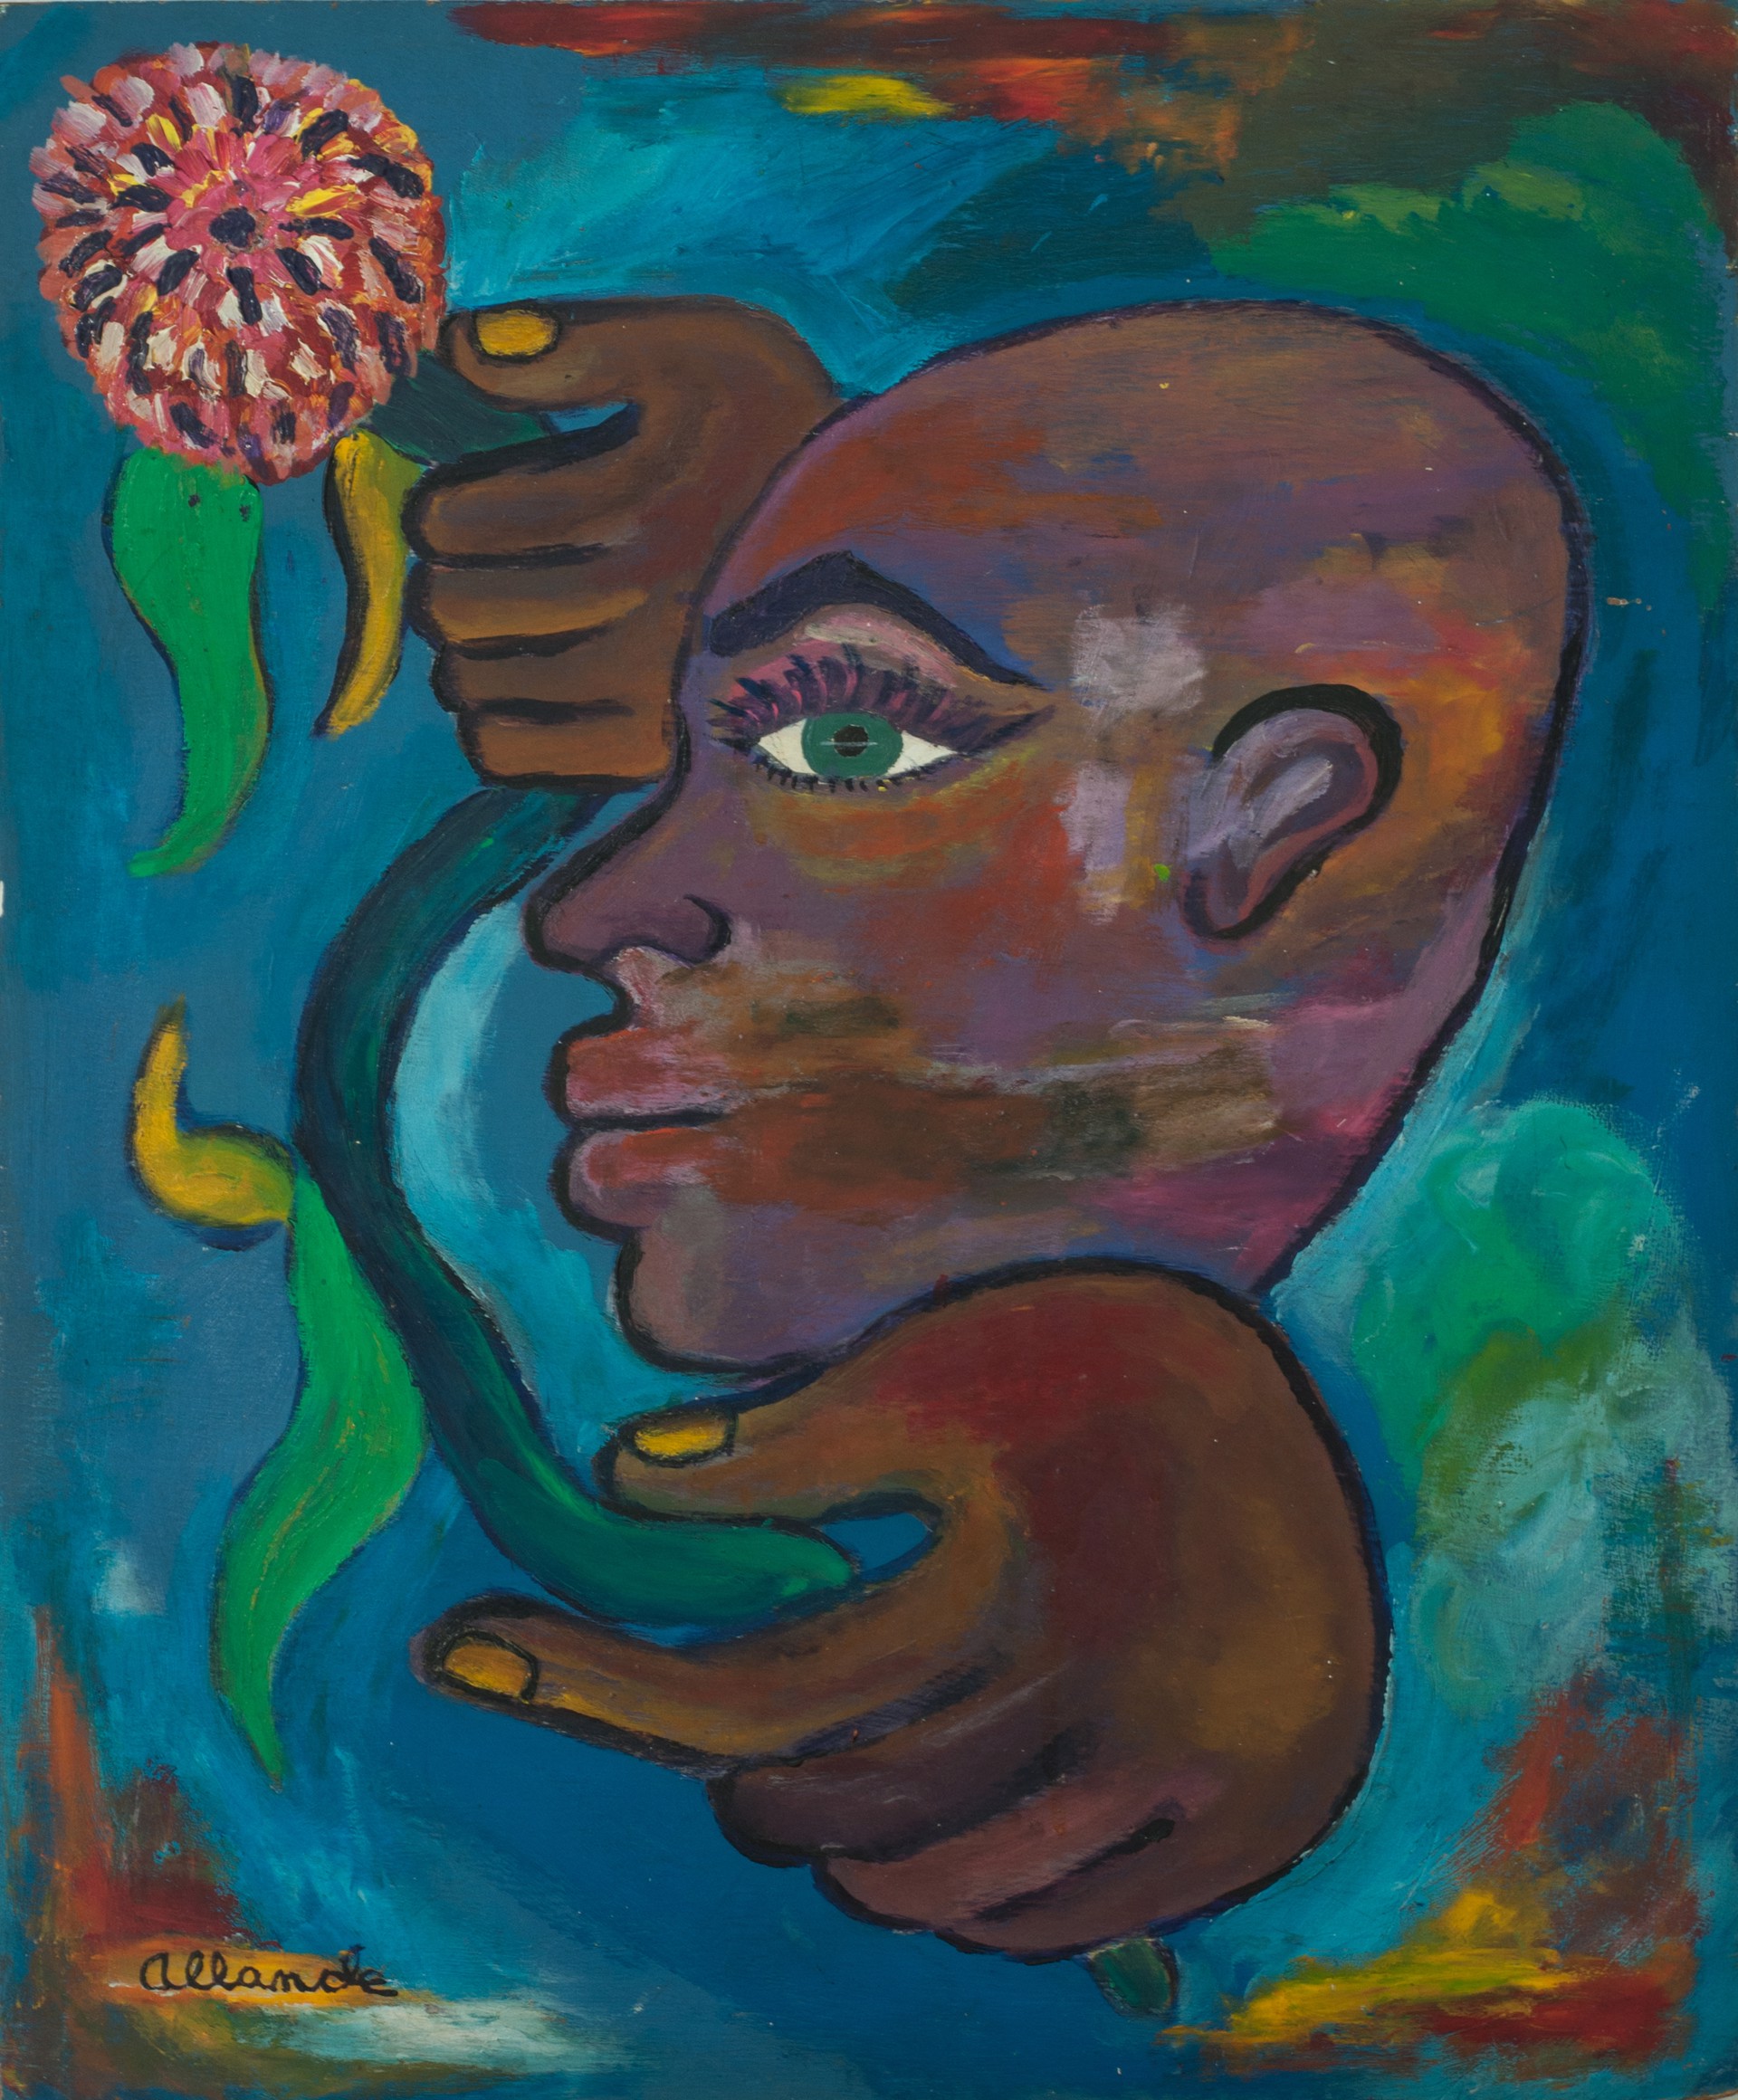 Figurative Abstract #5-3-96GSN by Allande (Haitian)